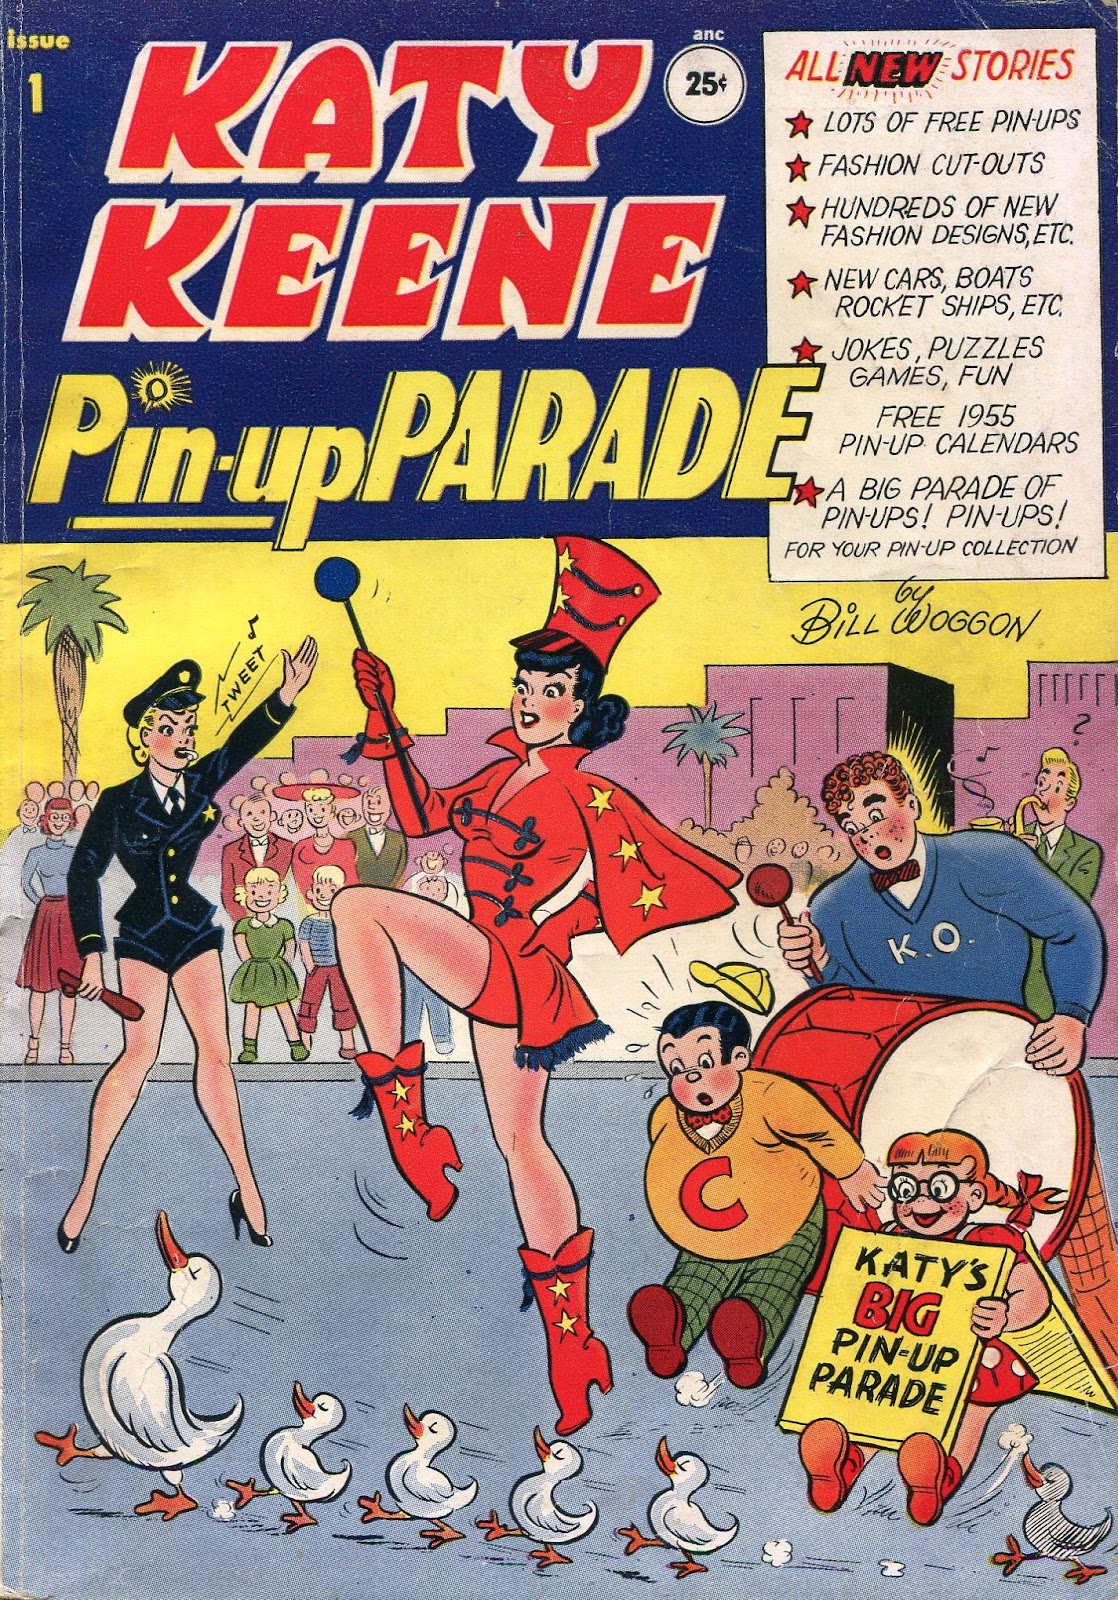 Katy Keene Pin-up Parade issue 1 - Page 1